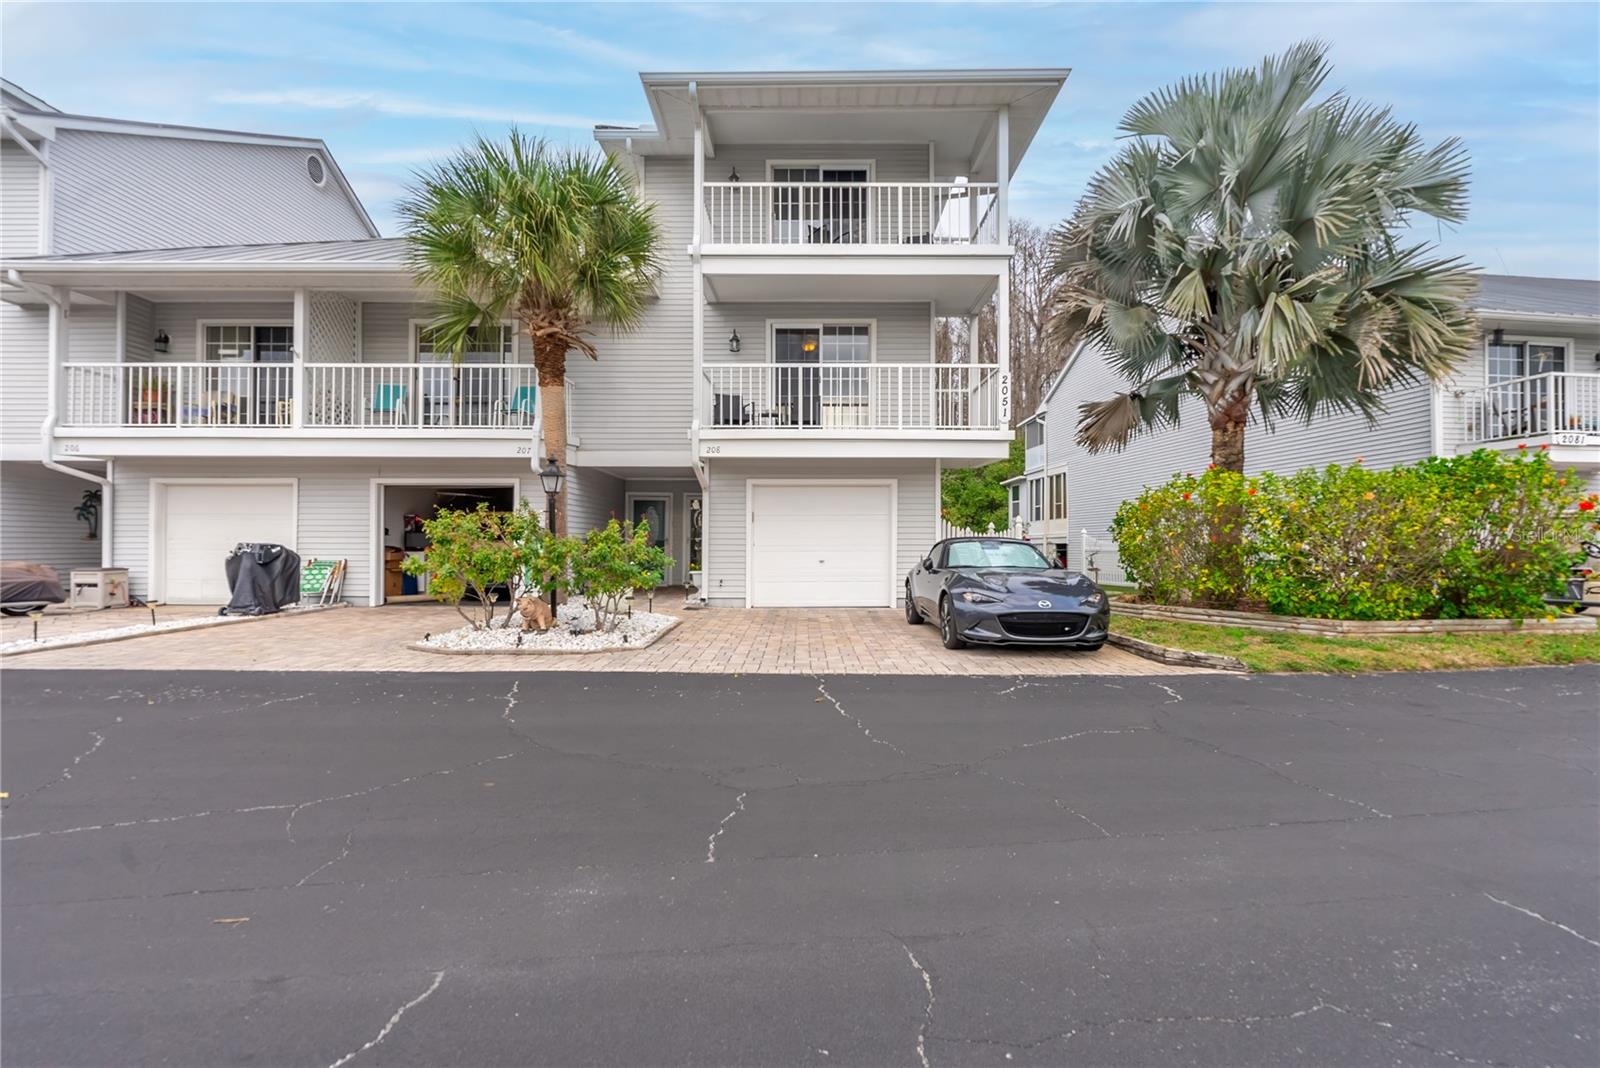 The Key West style condo has a paver driveway and a one car garage.